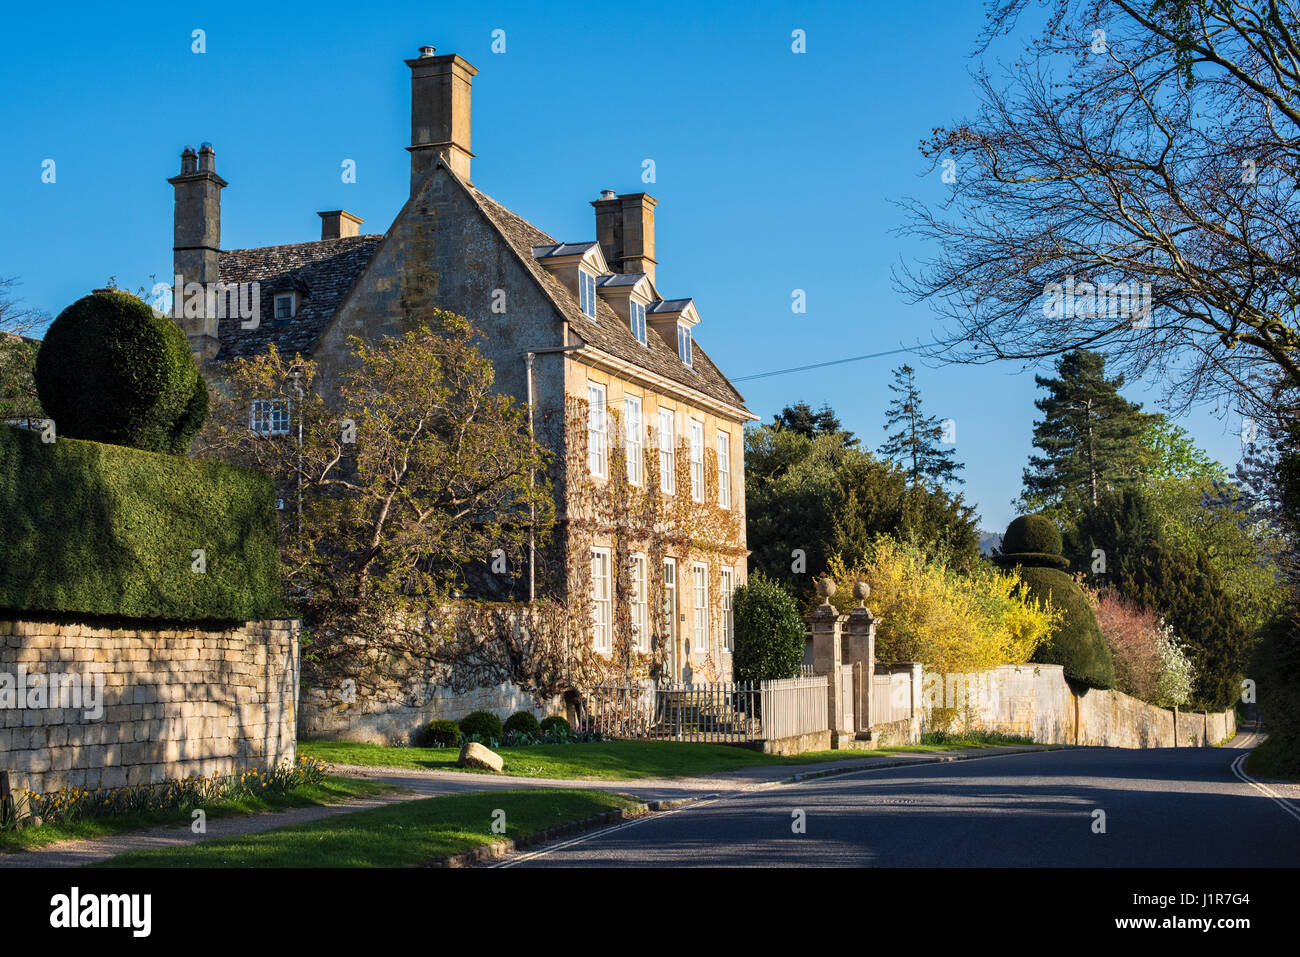 Cotswold stone house in the early spring evening sunlight. Broadway, Cotswolds, Worcestershire, England Stock Photo